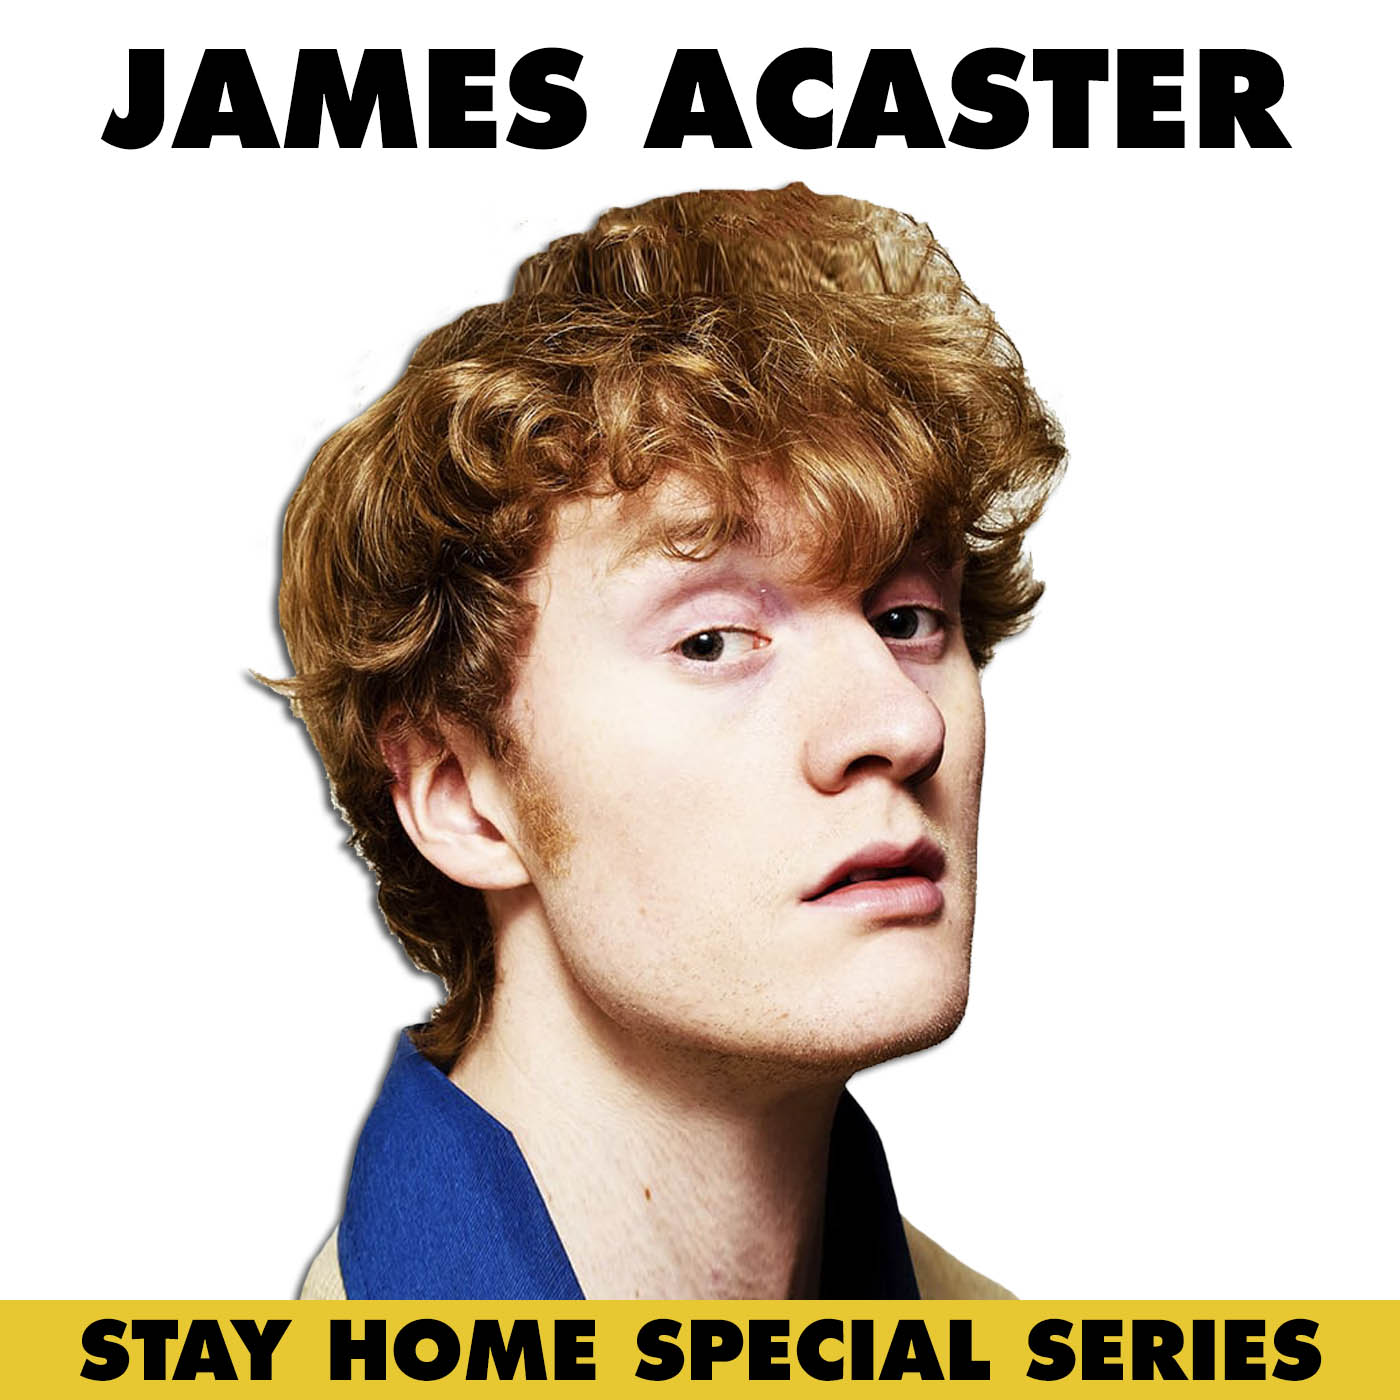 James Acaster s Stay Home Special